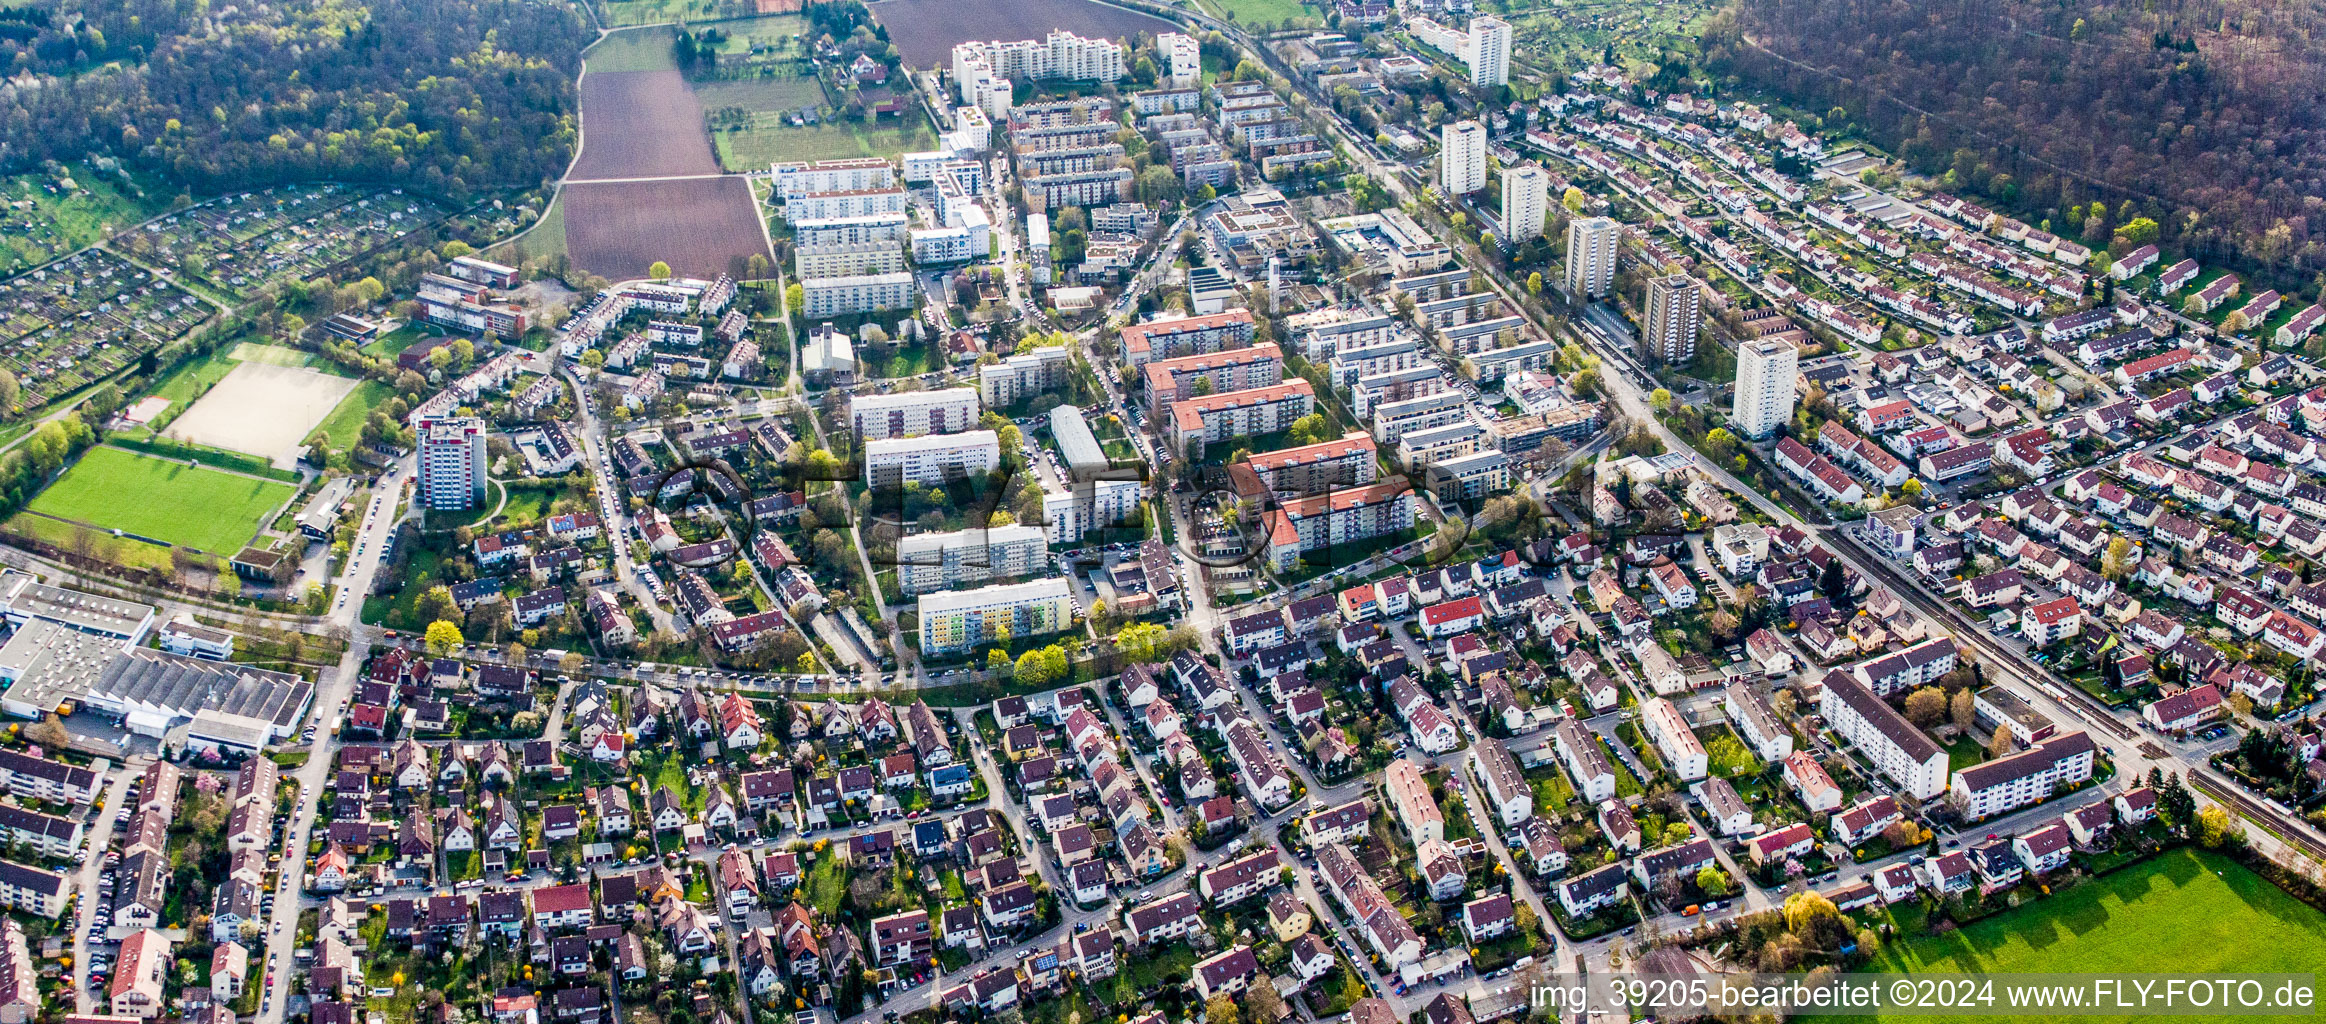 Settlement area in the district Giebel in Stuttgart in the state Baden-Wurttemberg, Germany